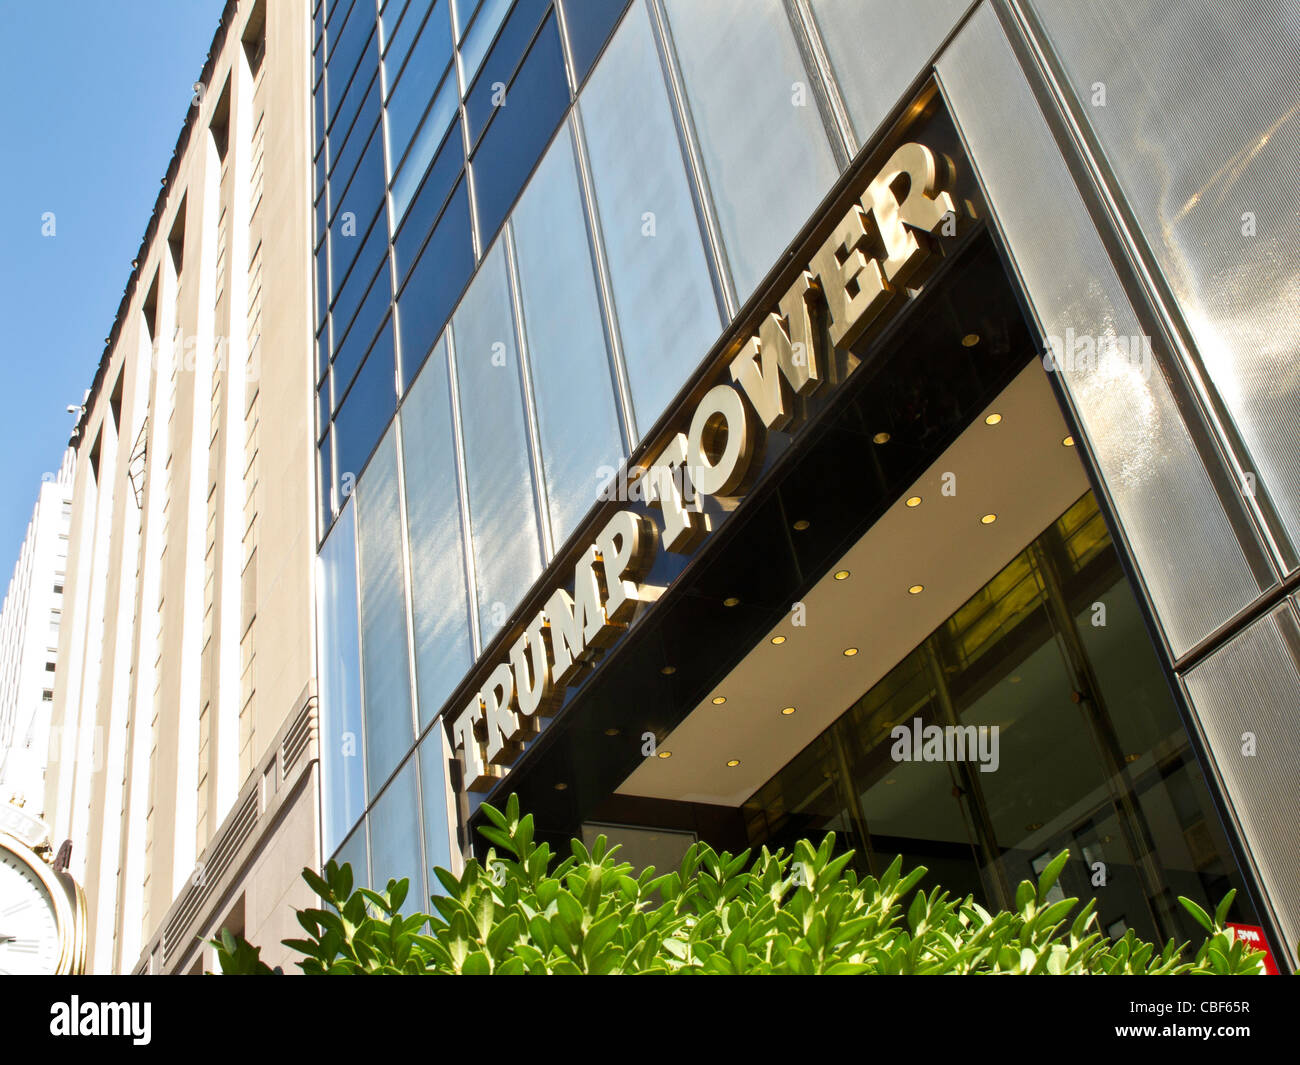 Trump Tower is a mixed use office building and residence skyscraper located in Midtown Manhattan on Fifth Avenue, New York City, USA Stock Photo